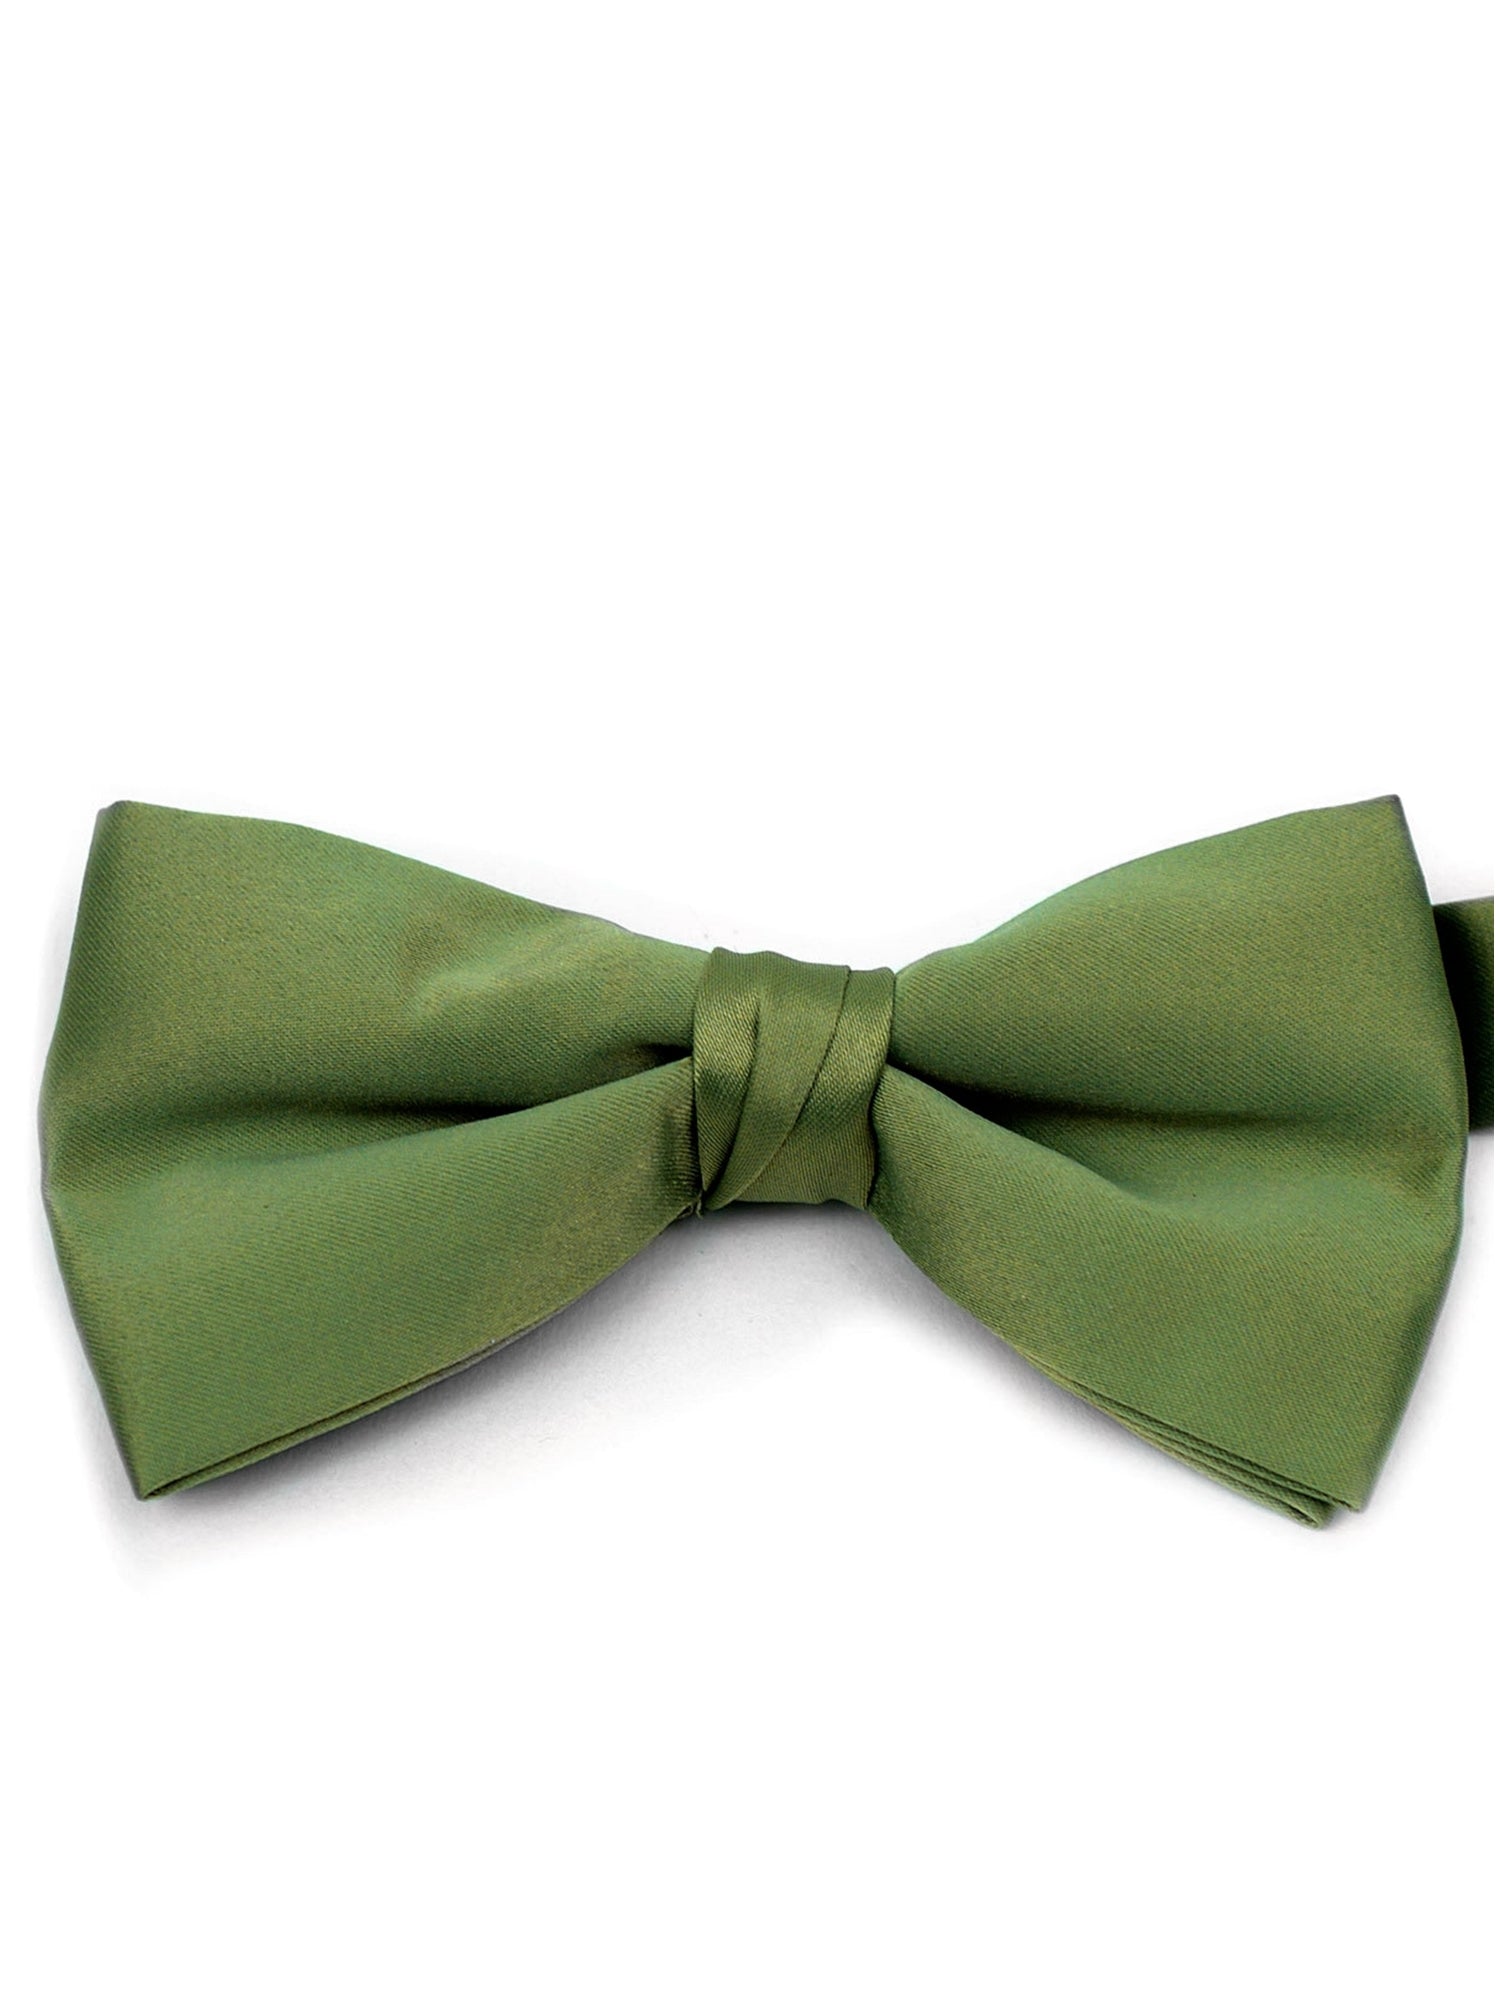 Young Boy's Pre-tied Adjustable Length Bow Tie - Formal Tuxedo Solid Color Boy's Solid Color Bow Tie TheDapperTie Olive One Size 